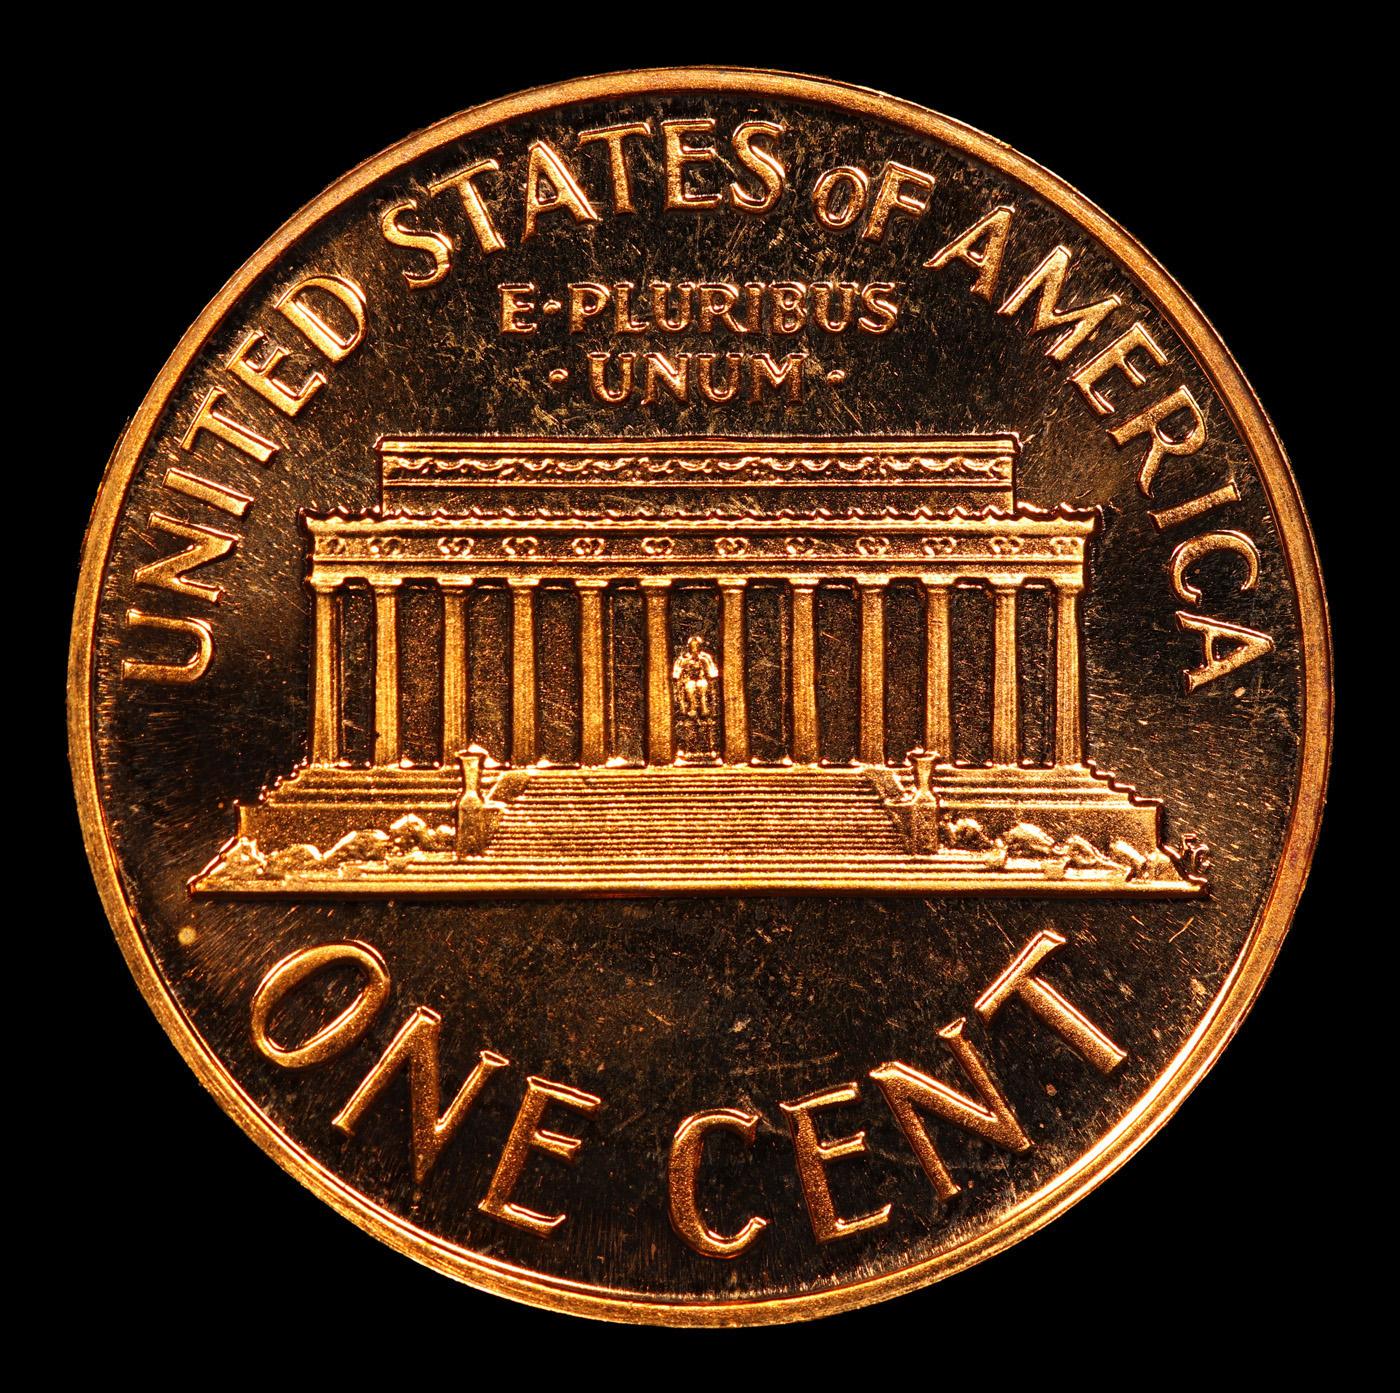 Proof ***Auction Highlight*** 1962 Lincoln Cent TOP POP! 1c Graded pr69 rd dcam BY SEGS (fc)